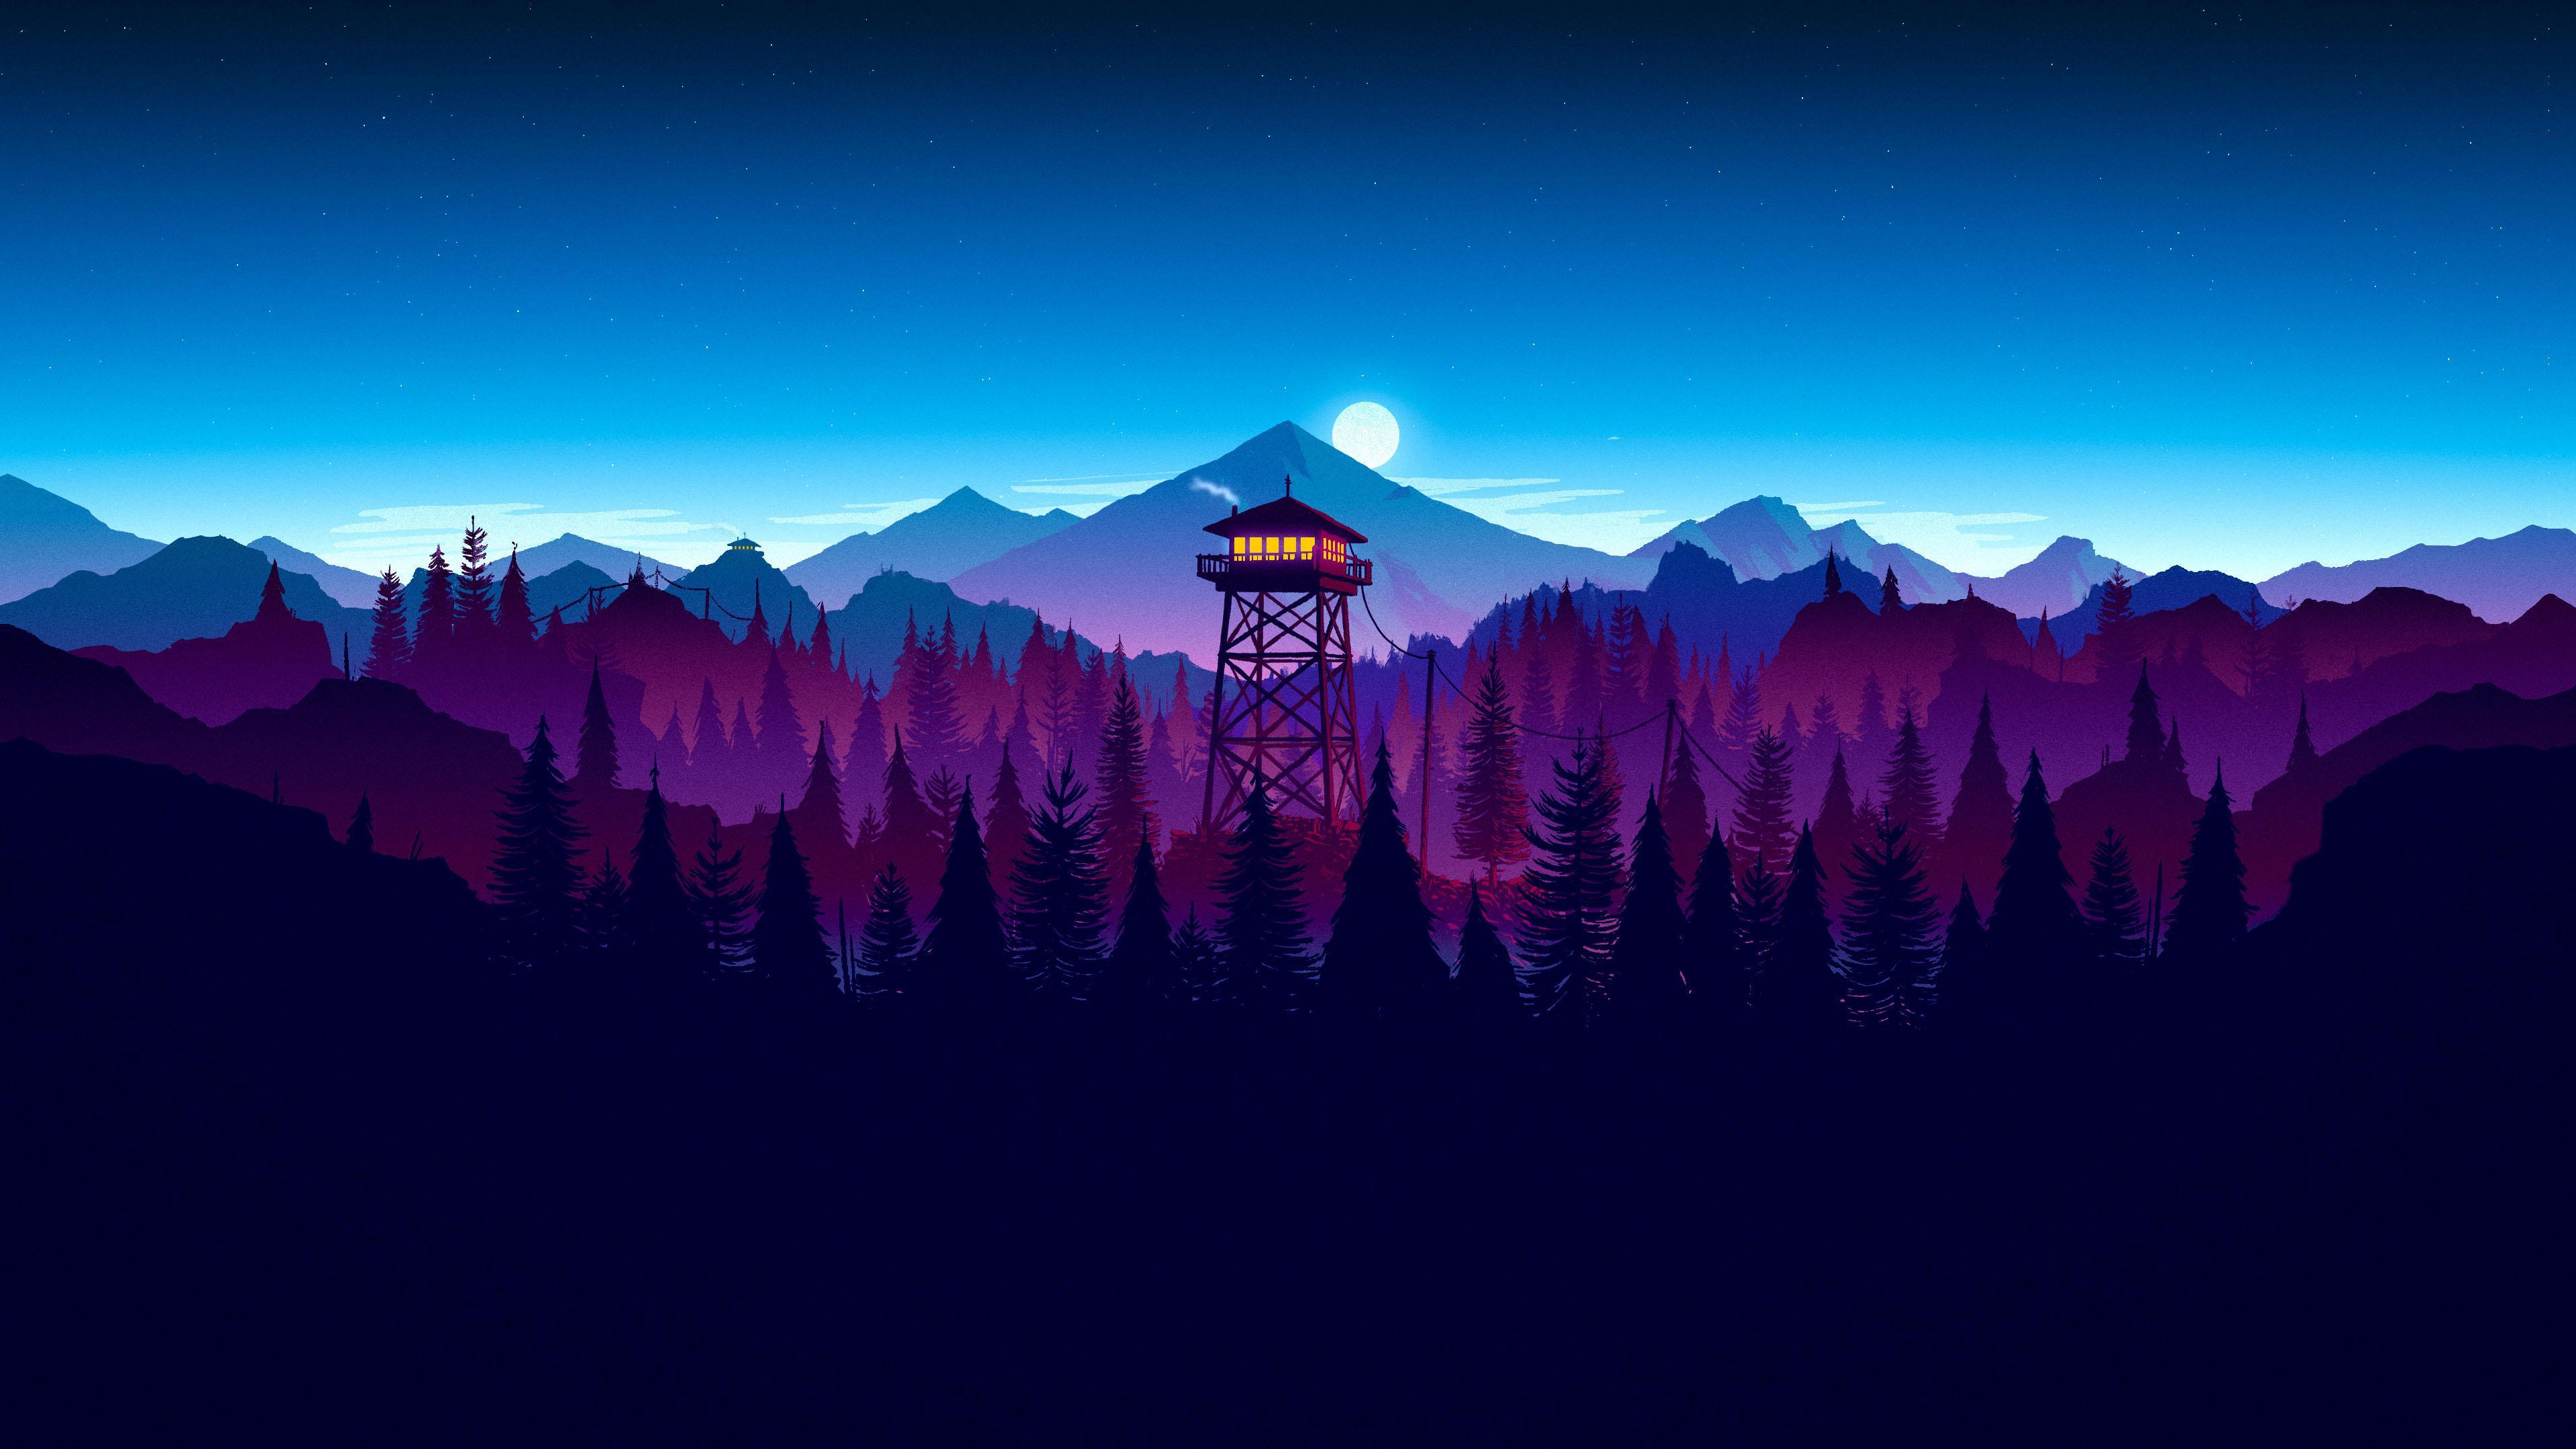 Firewatch 4K wallpaper for your desktop or mobile screen free and easy to download